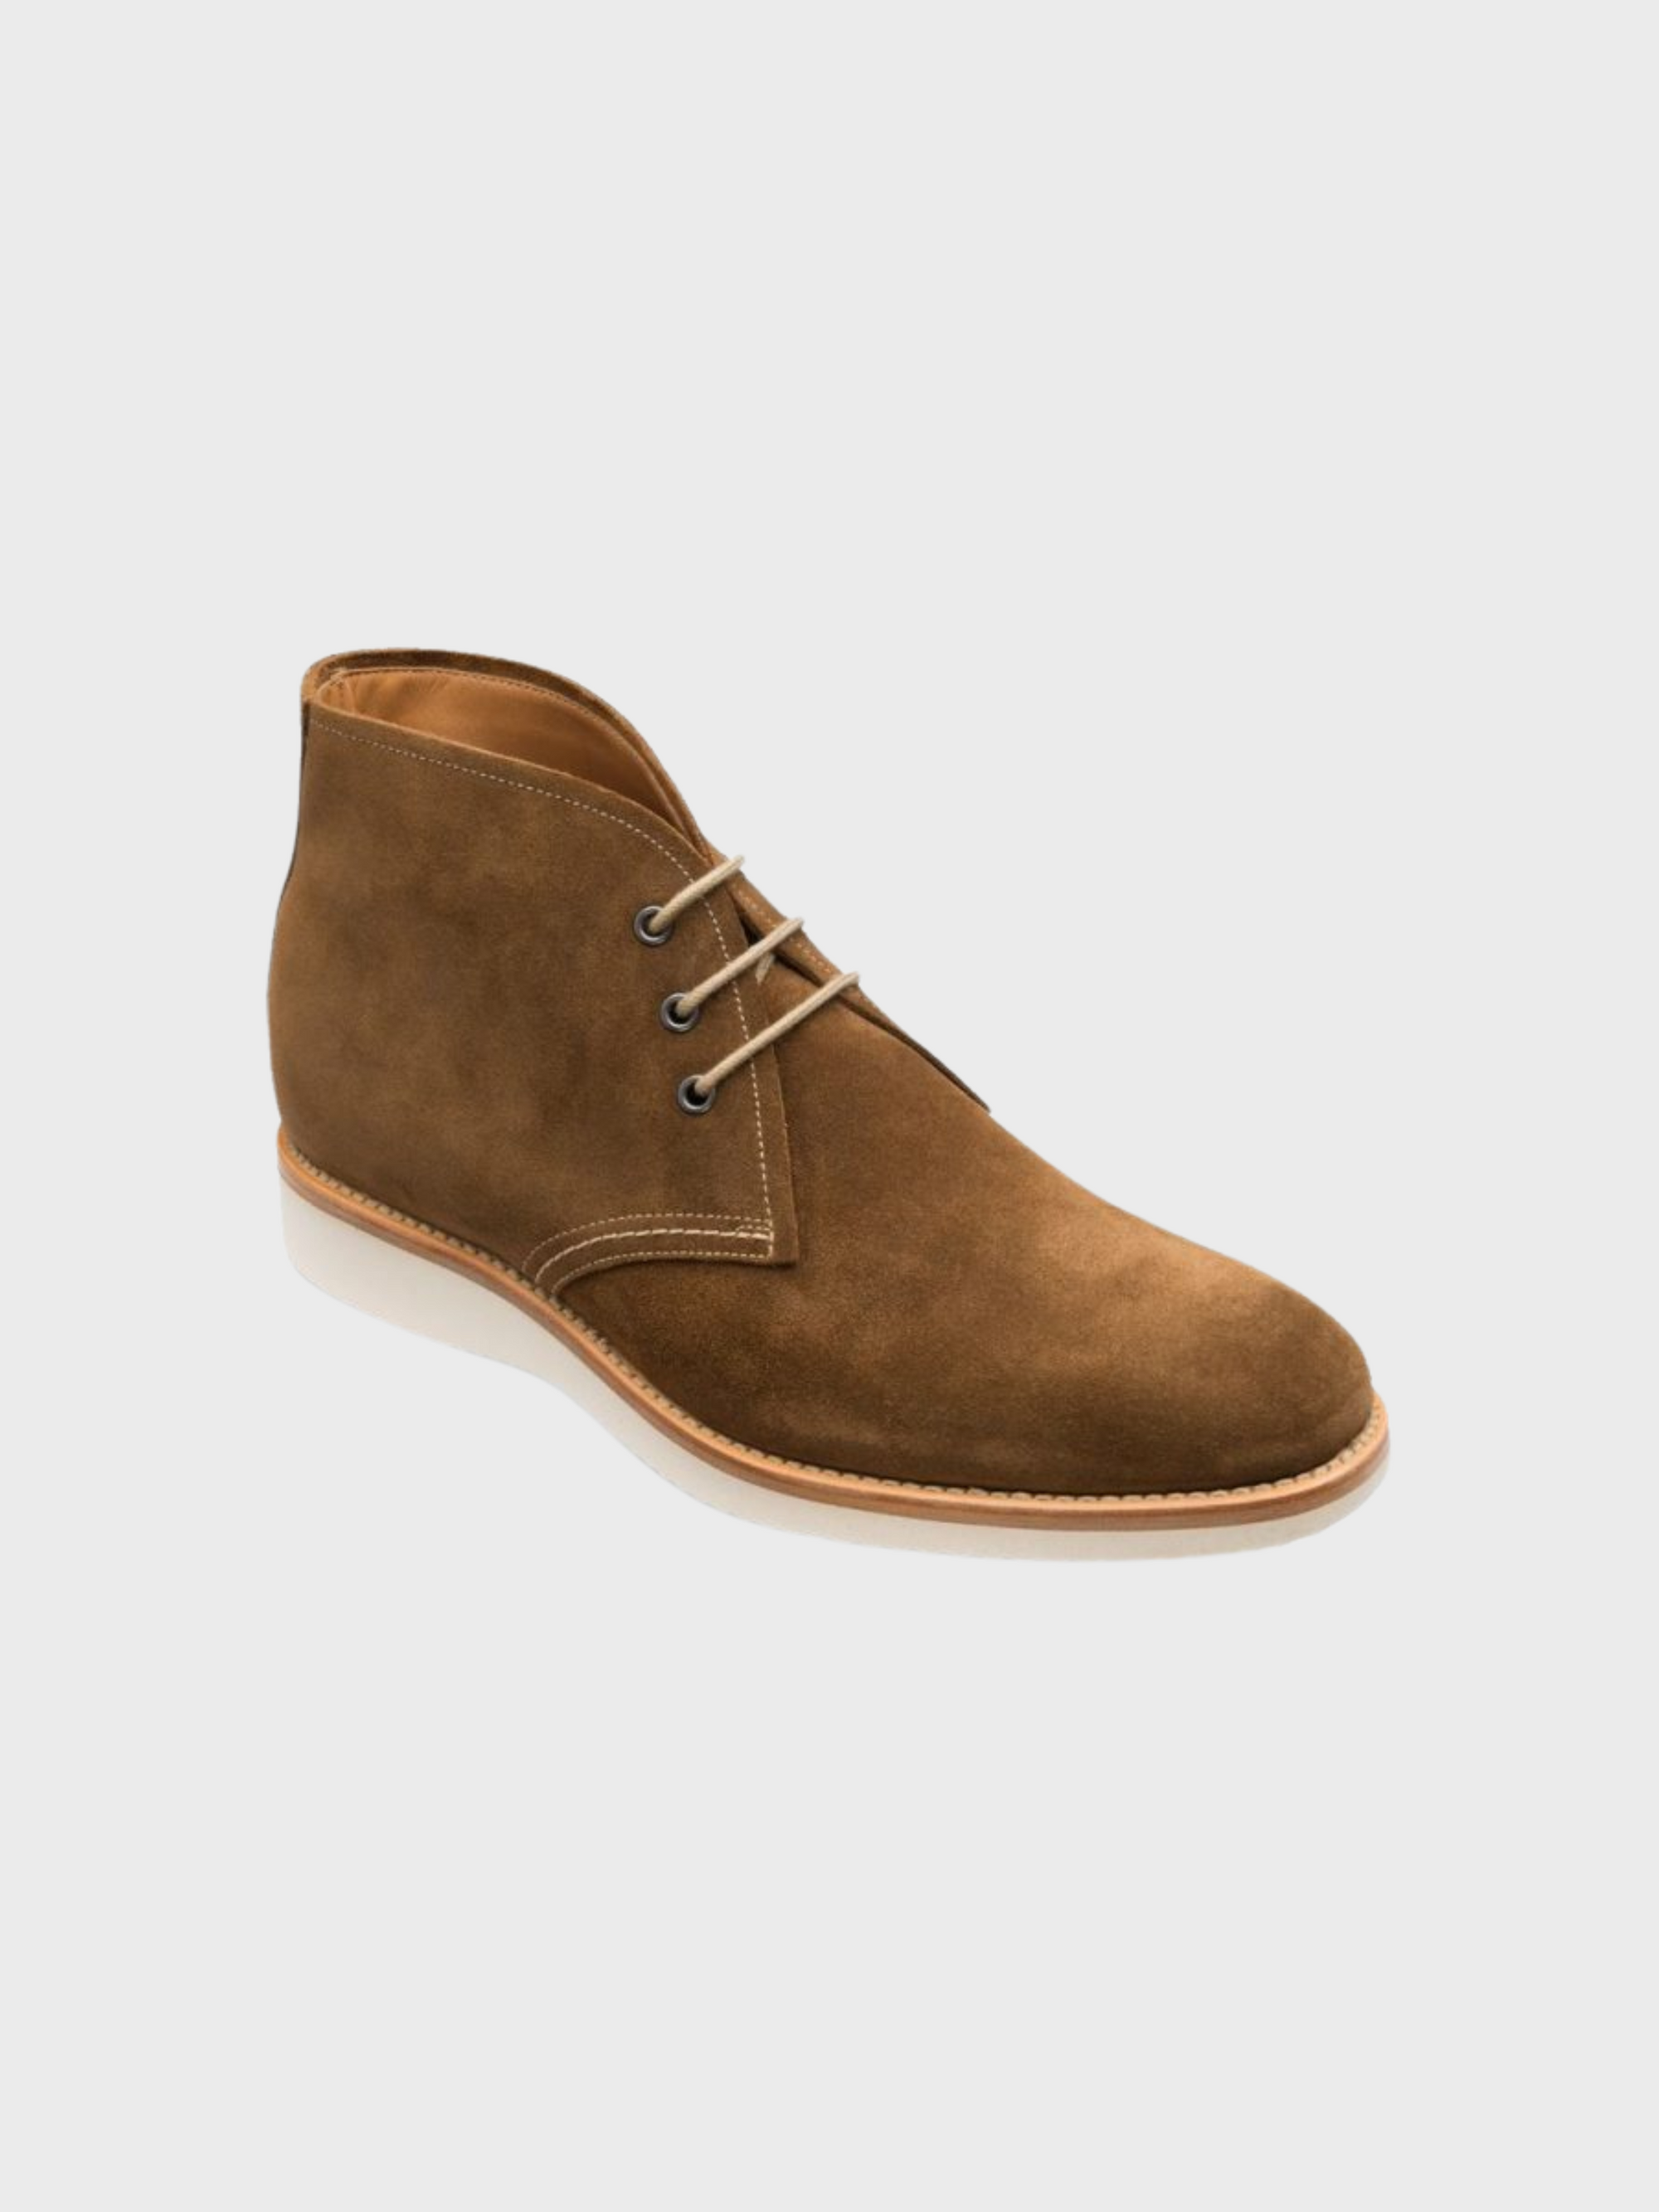 Loake - Chukka Boot- Python Tan Suede-Men&#39;s Shoes-Yaletown-Vancouver-Surrey-Canada